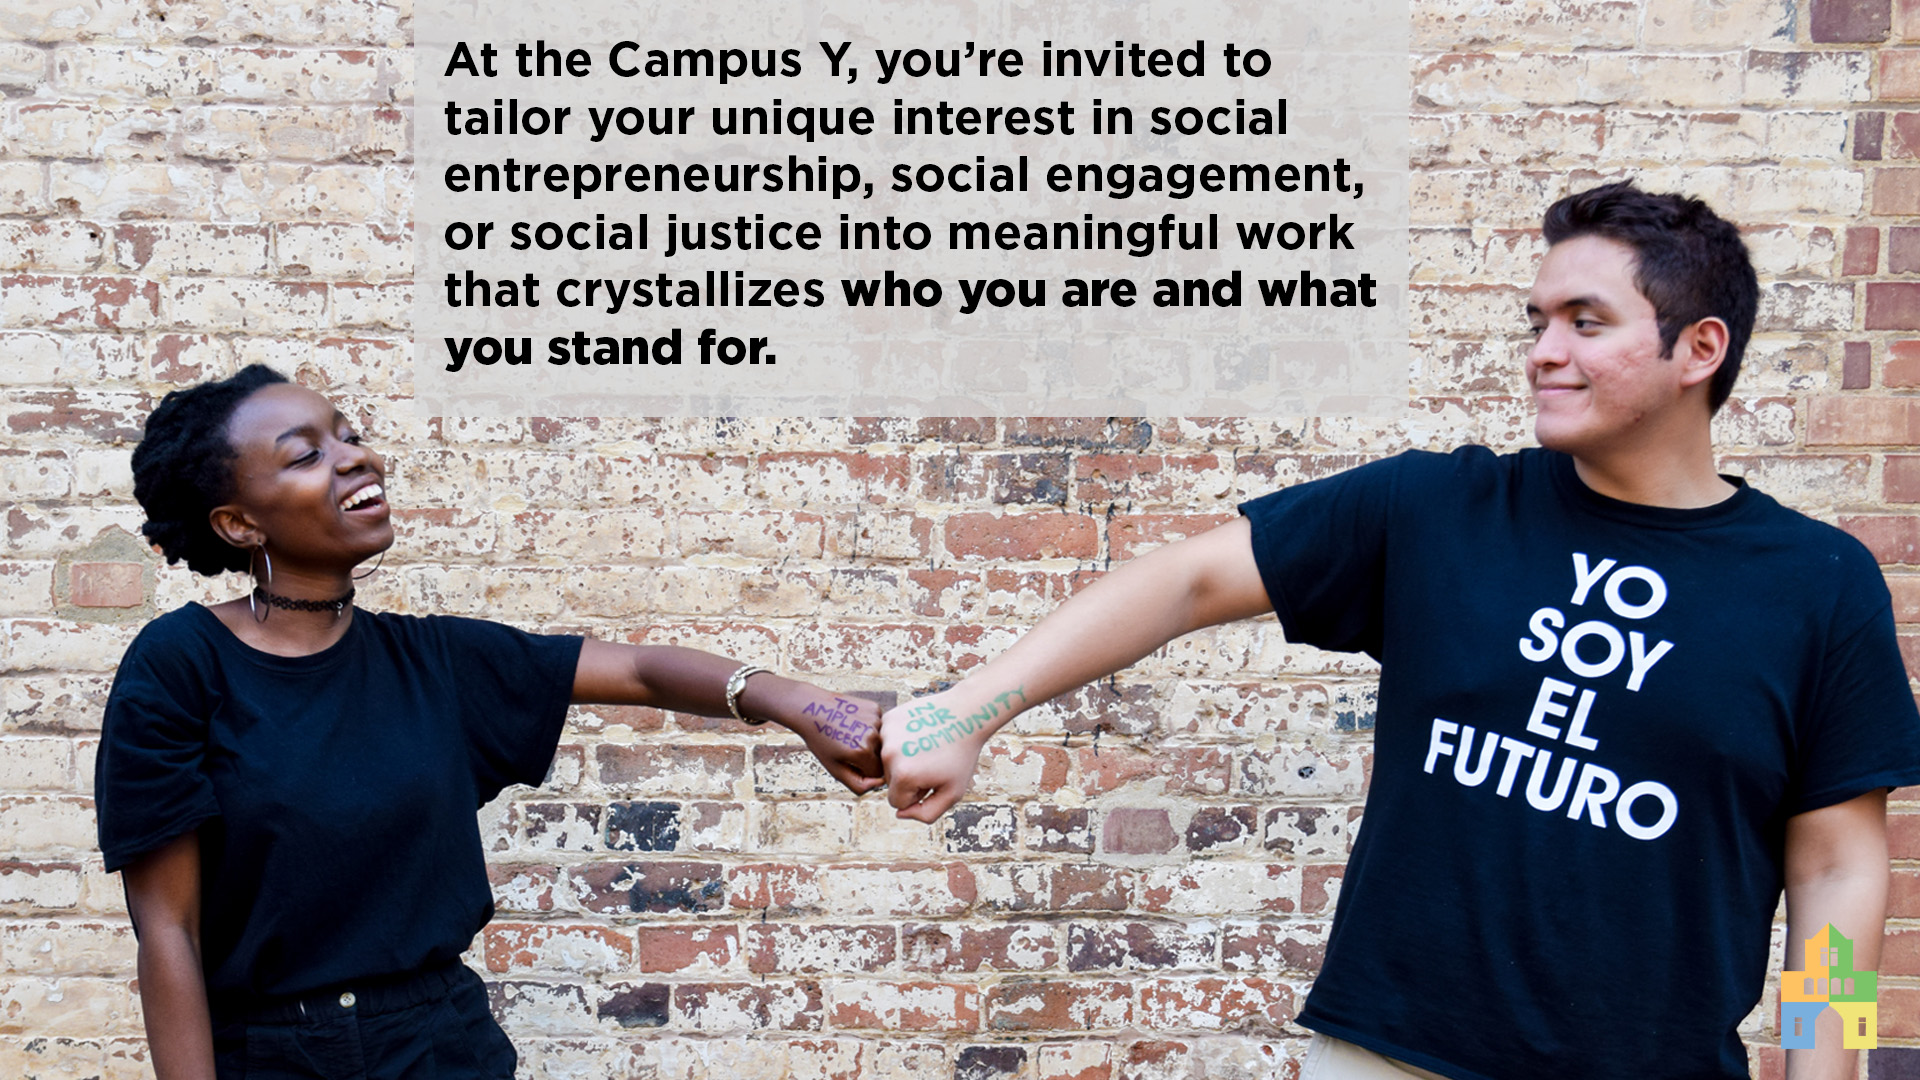 At the Campus Y, you’re invited to tailor your particular interest in social entrepreneurship, social engagement, or social justice into meaningful work that crystallizes who you are and what you stand for.